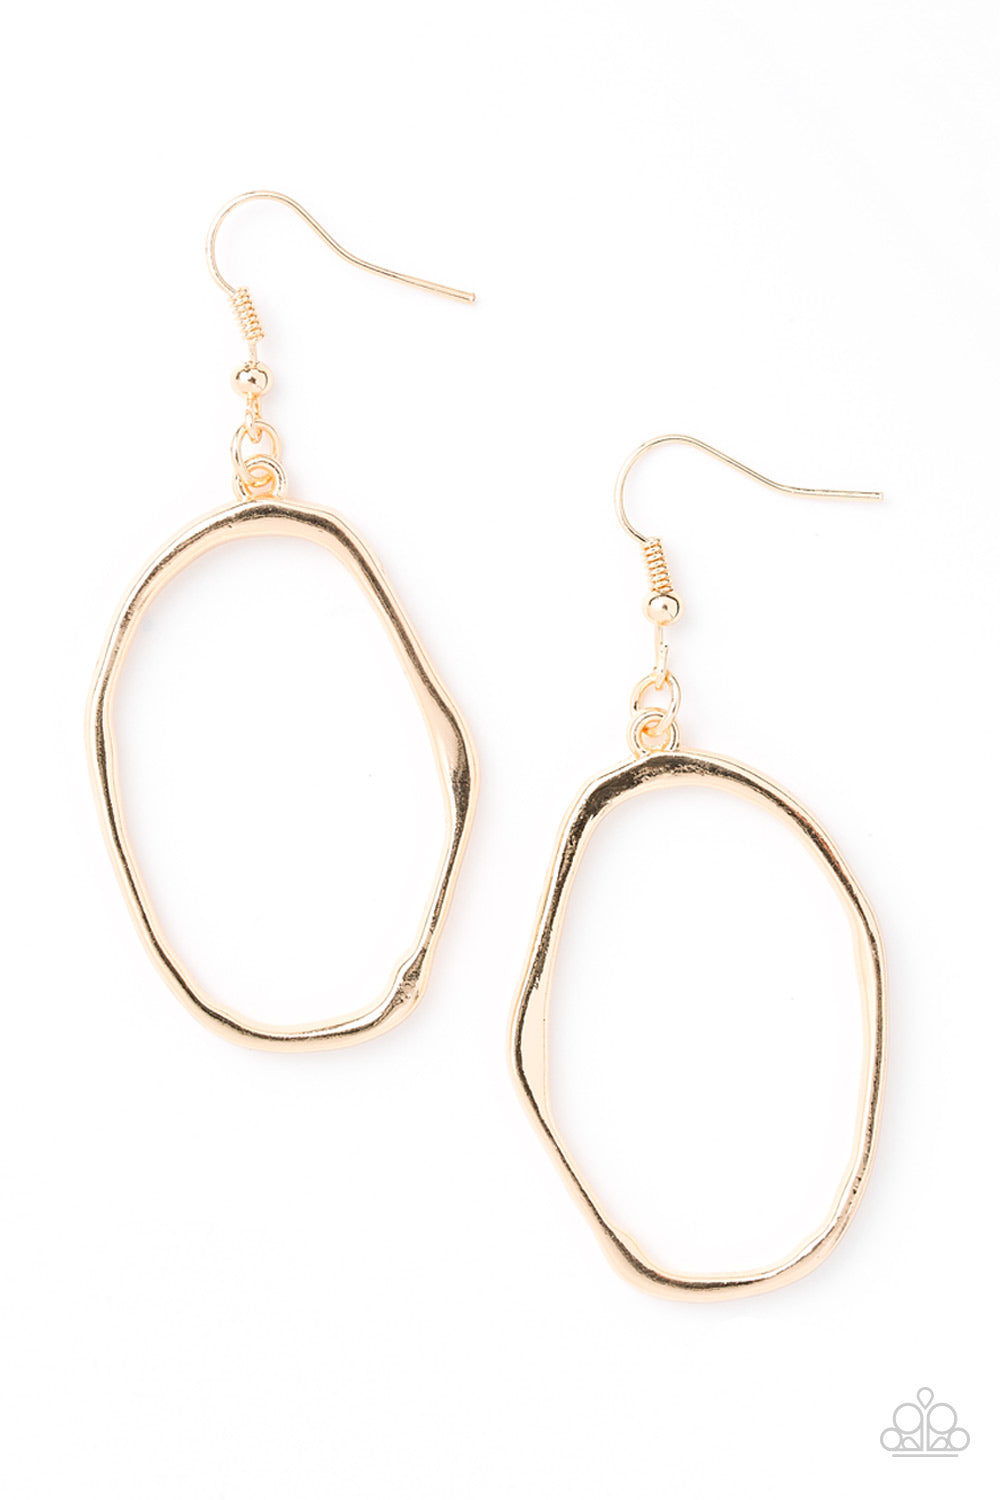 Eco Chic Paparazzi Accessories Earrings